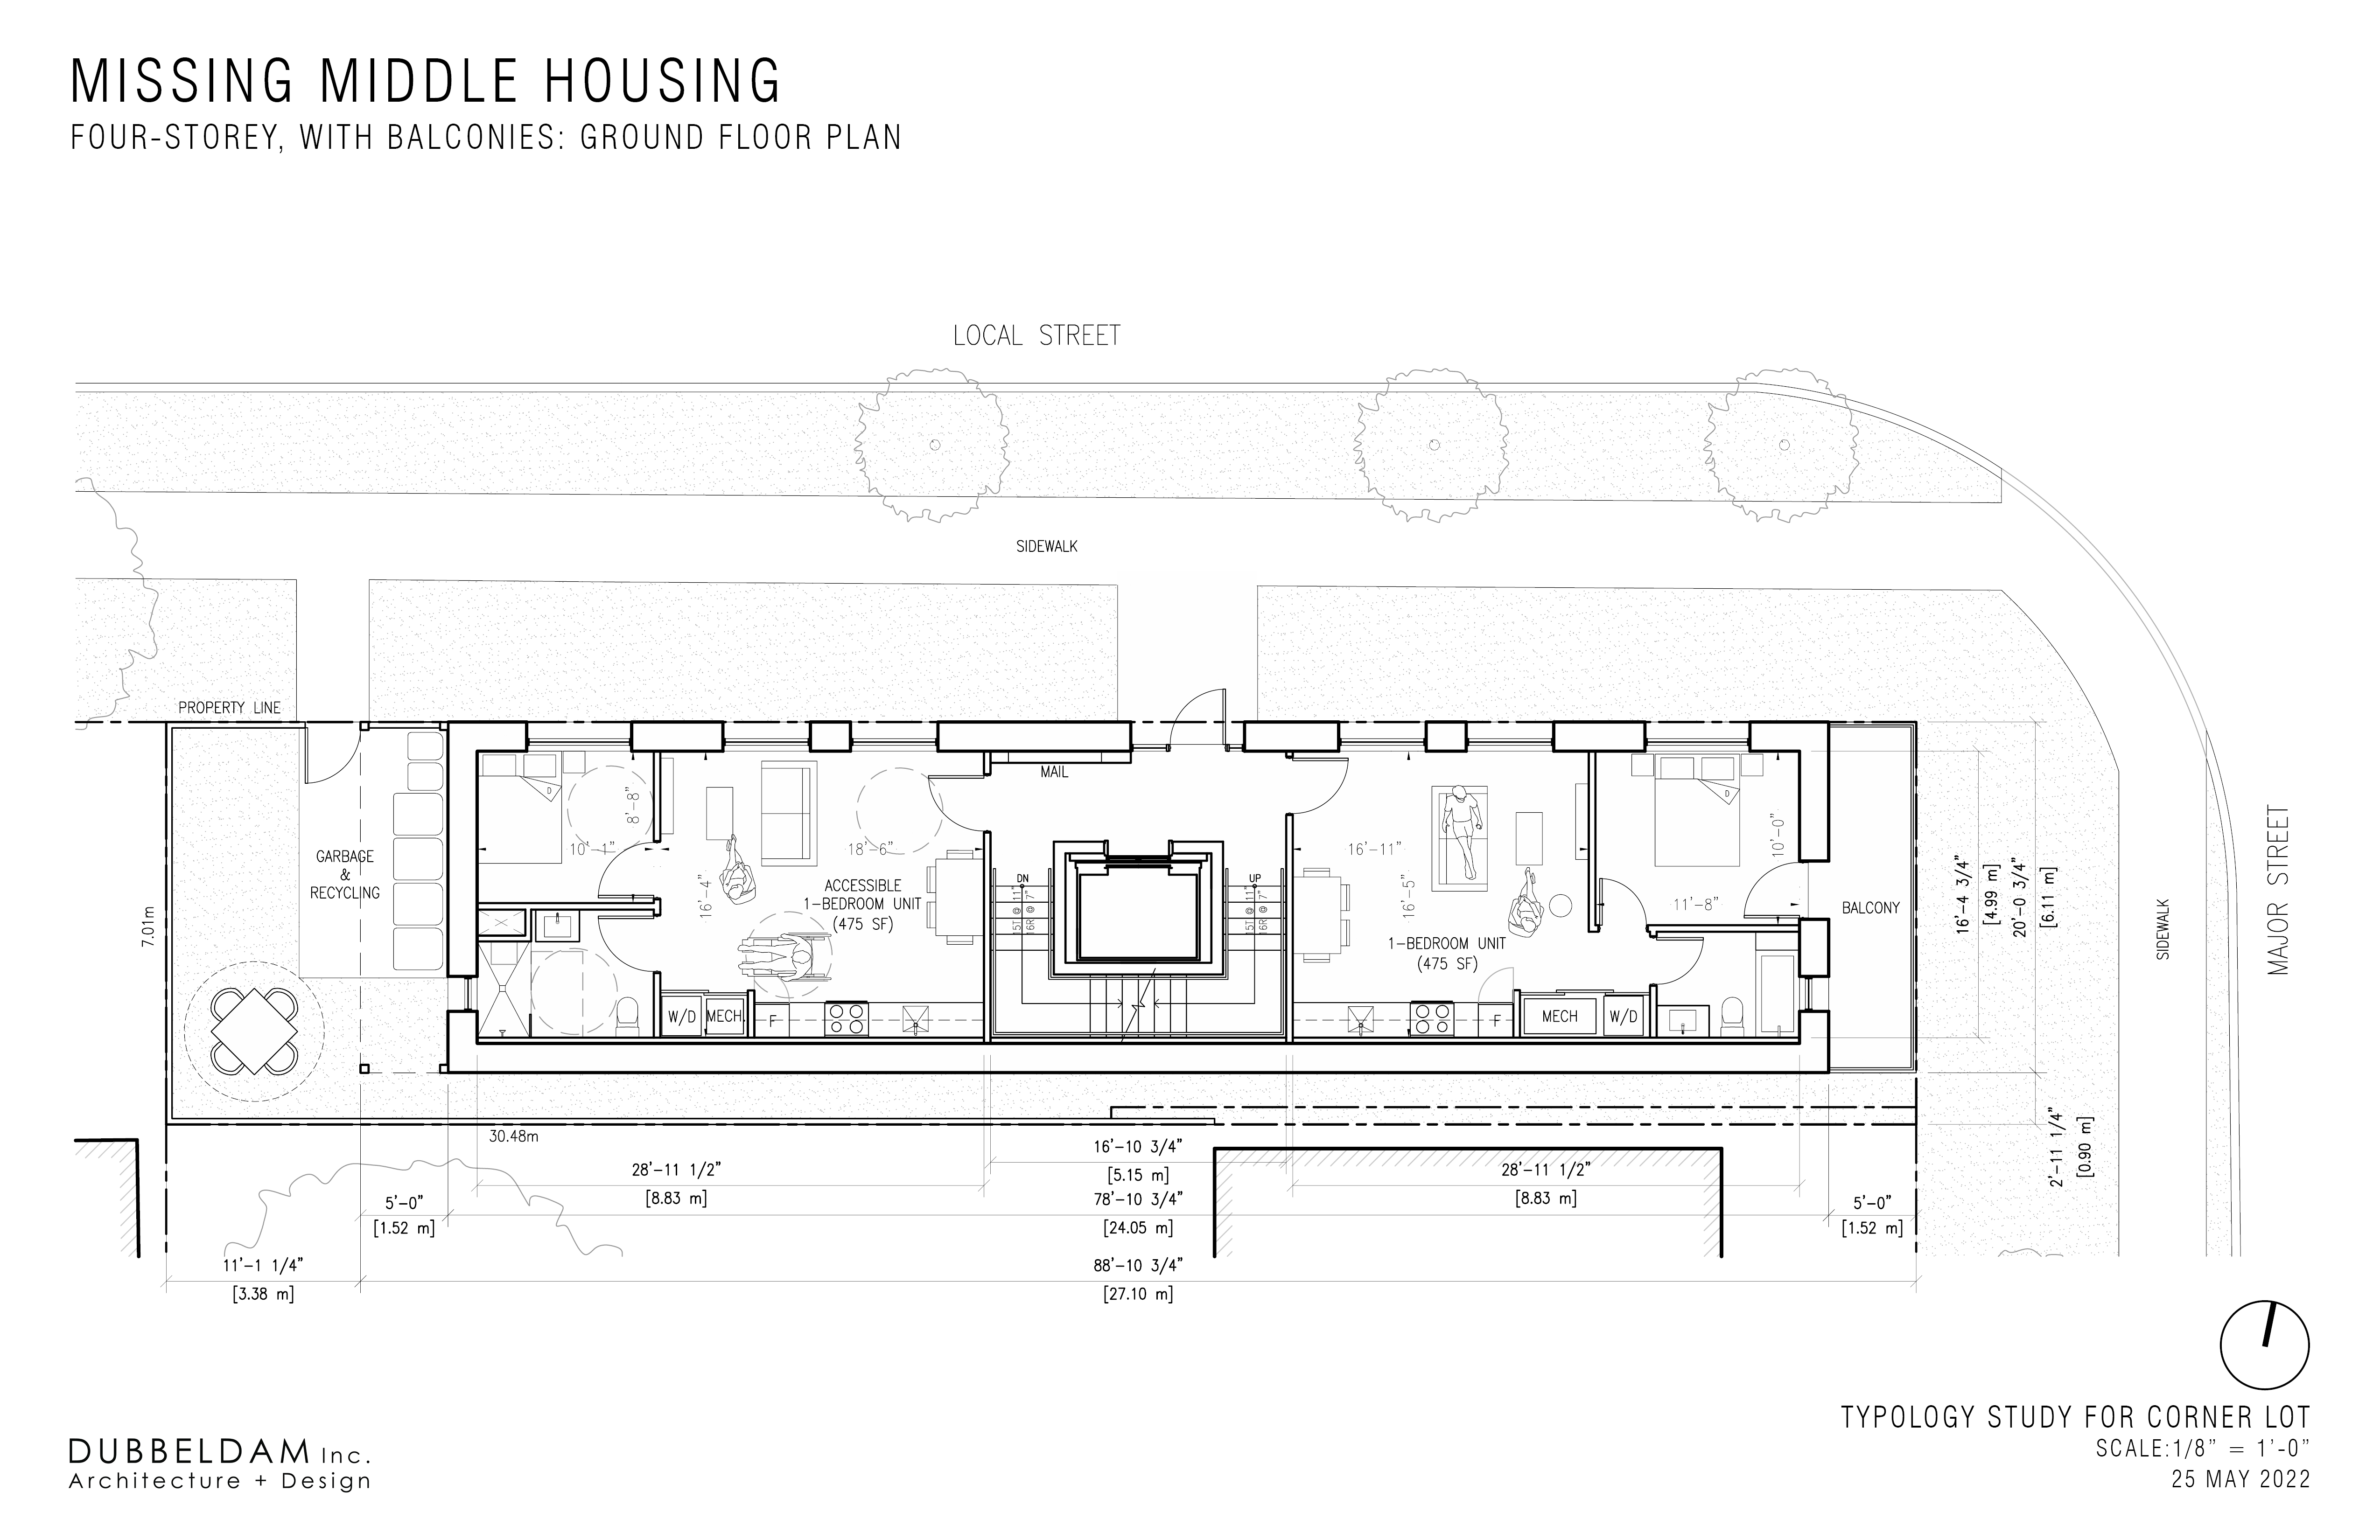 Ground floor plan of a 4-storey missing middle development with a single stair and elevator core allows for accessible and barrier-free ground floor units